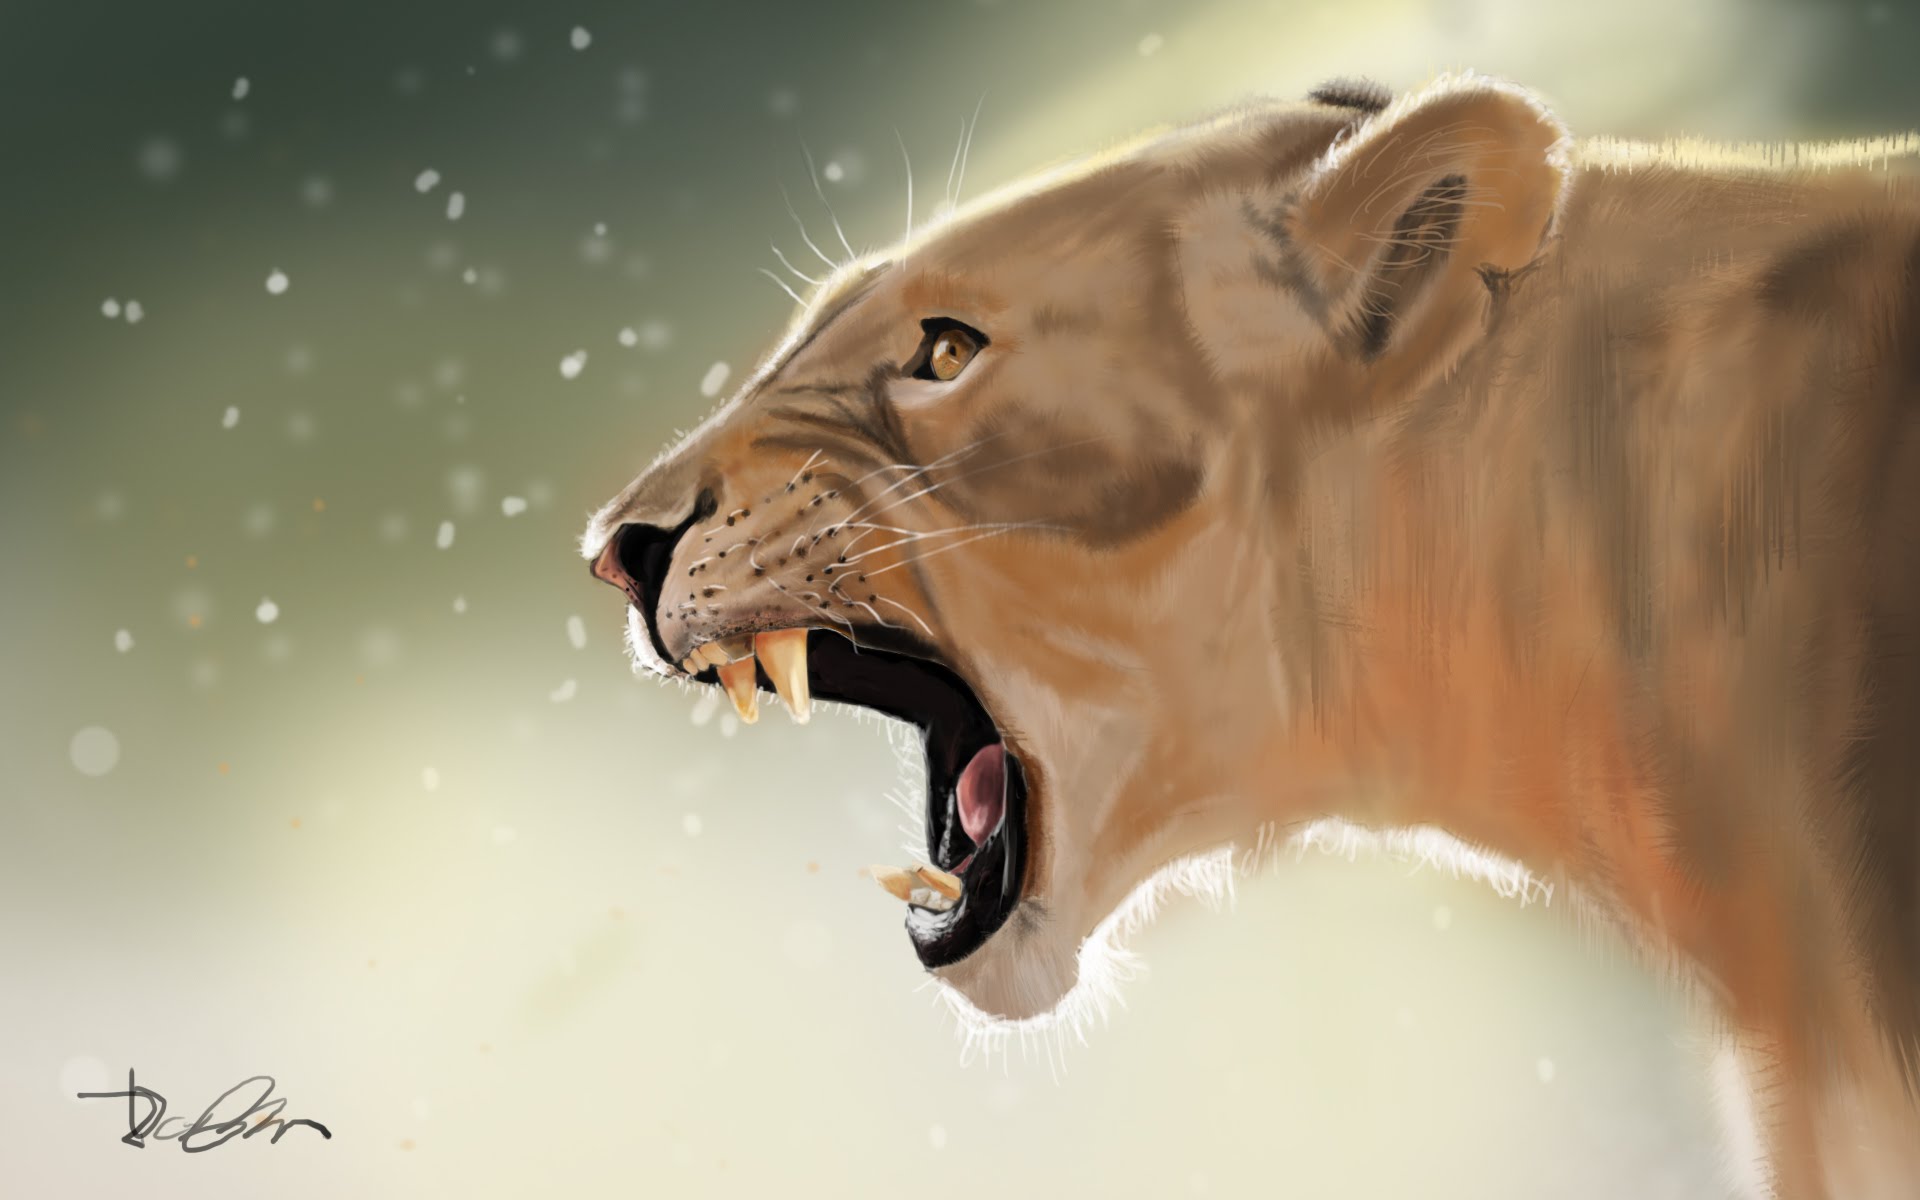 Wild Lioness - Speed Painting [#Photoshop] - YouTube